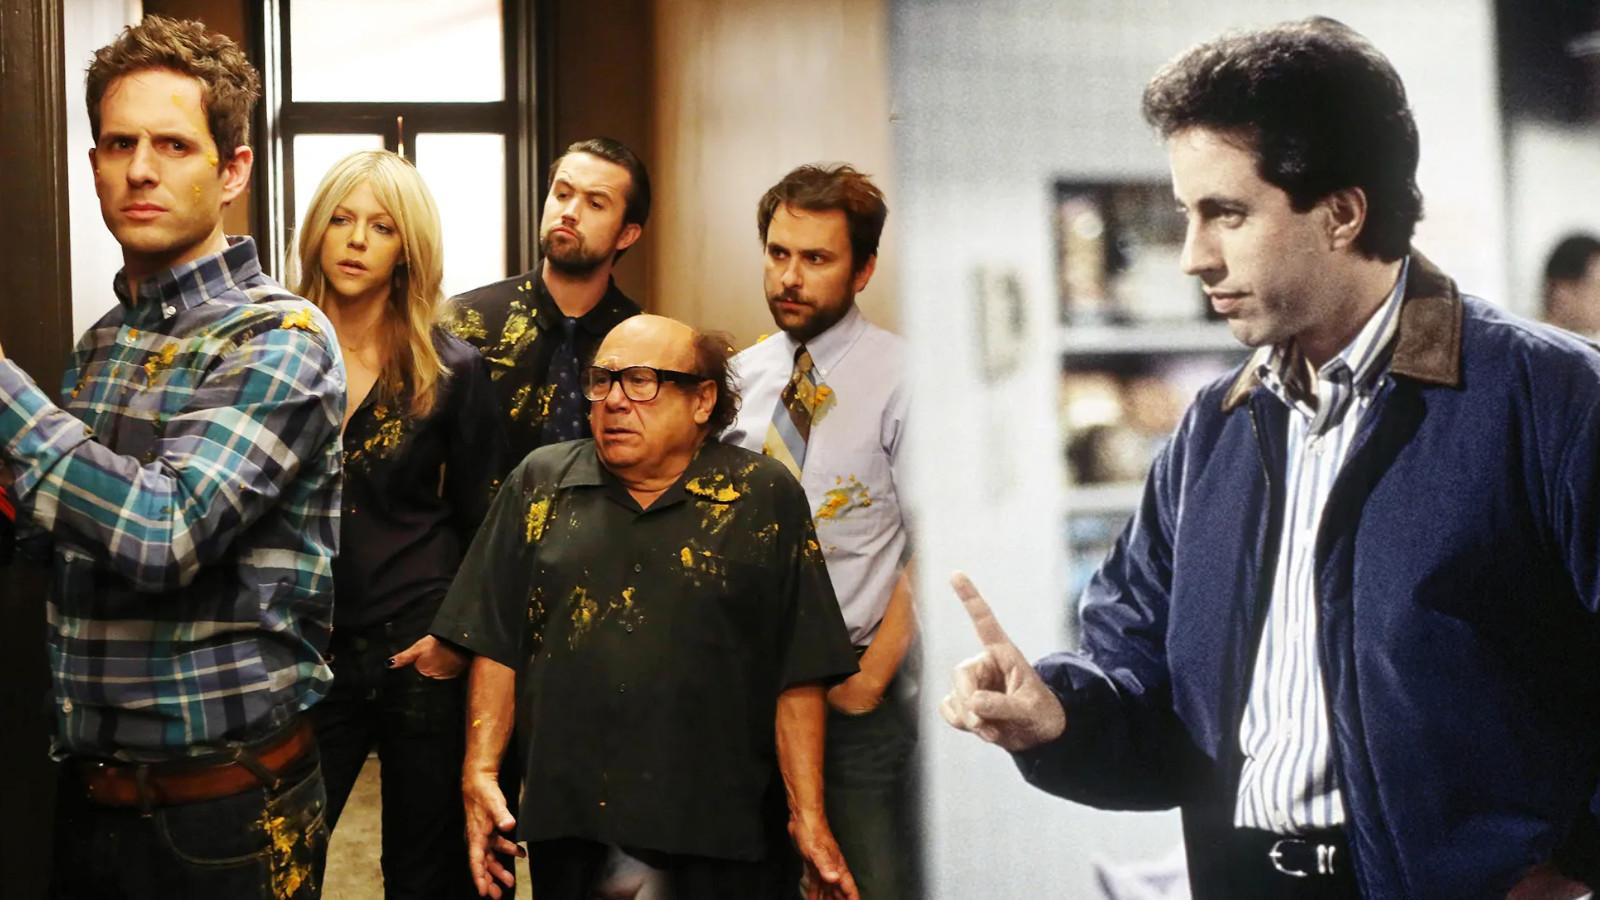 The cast of It's Always Sunny and Jerry Seinfeld in Seinfeld